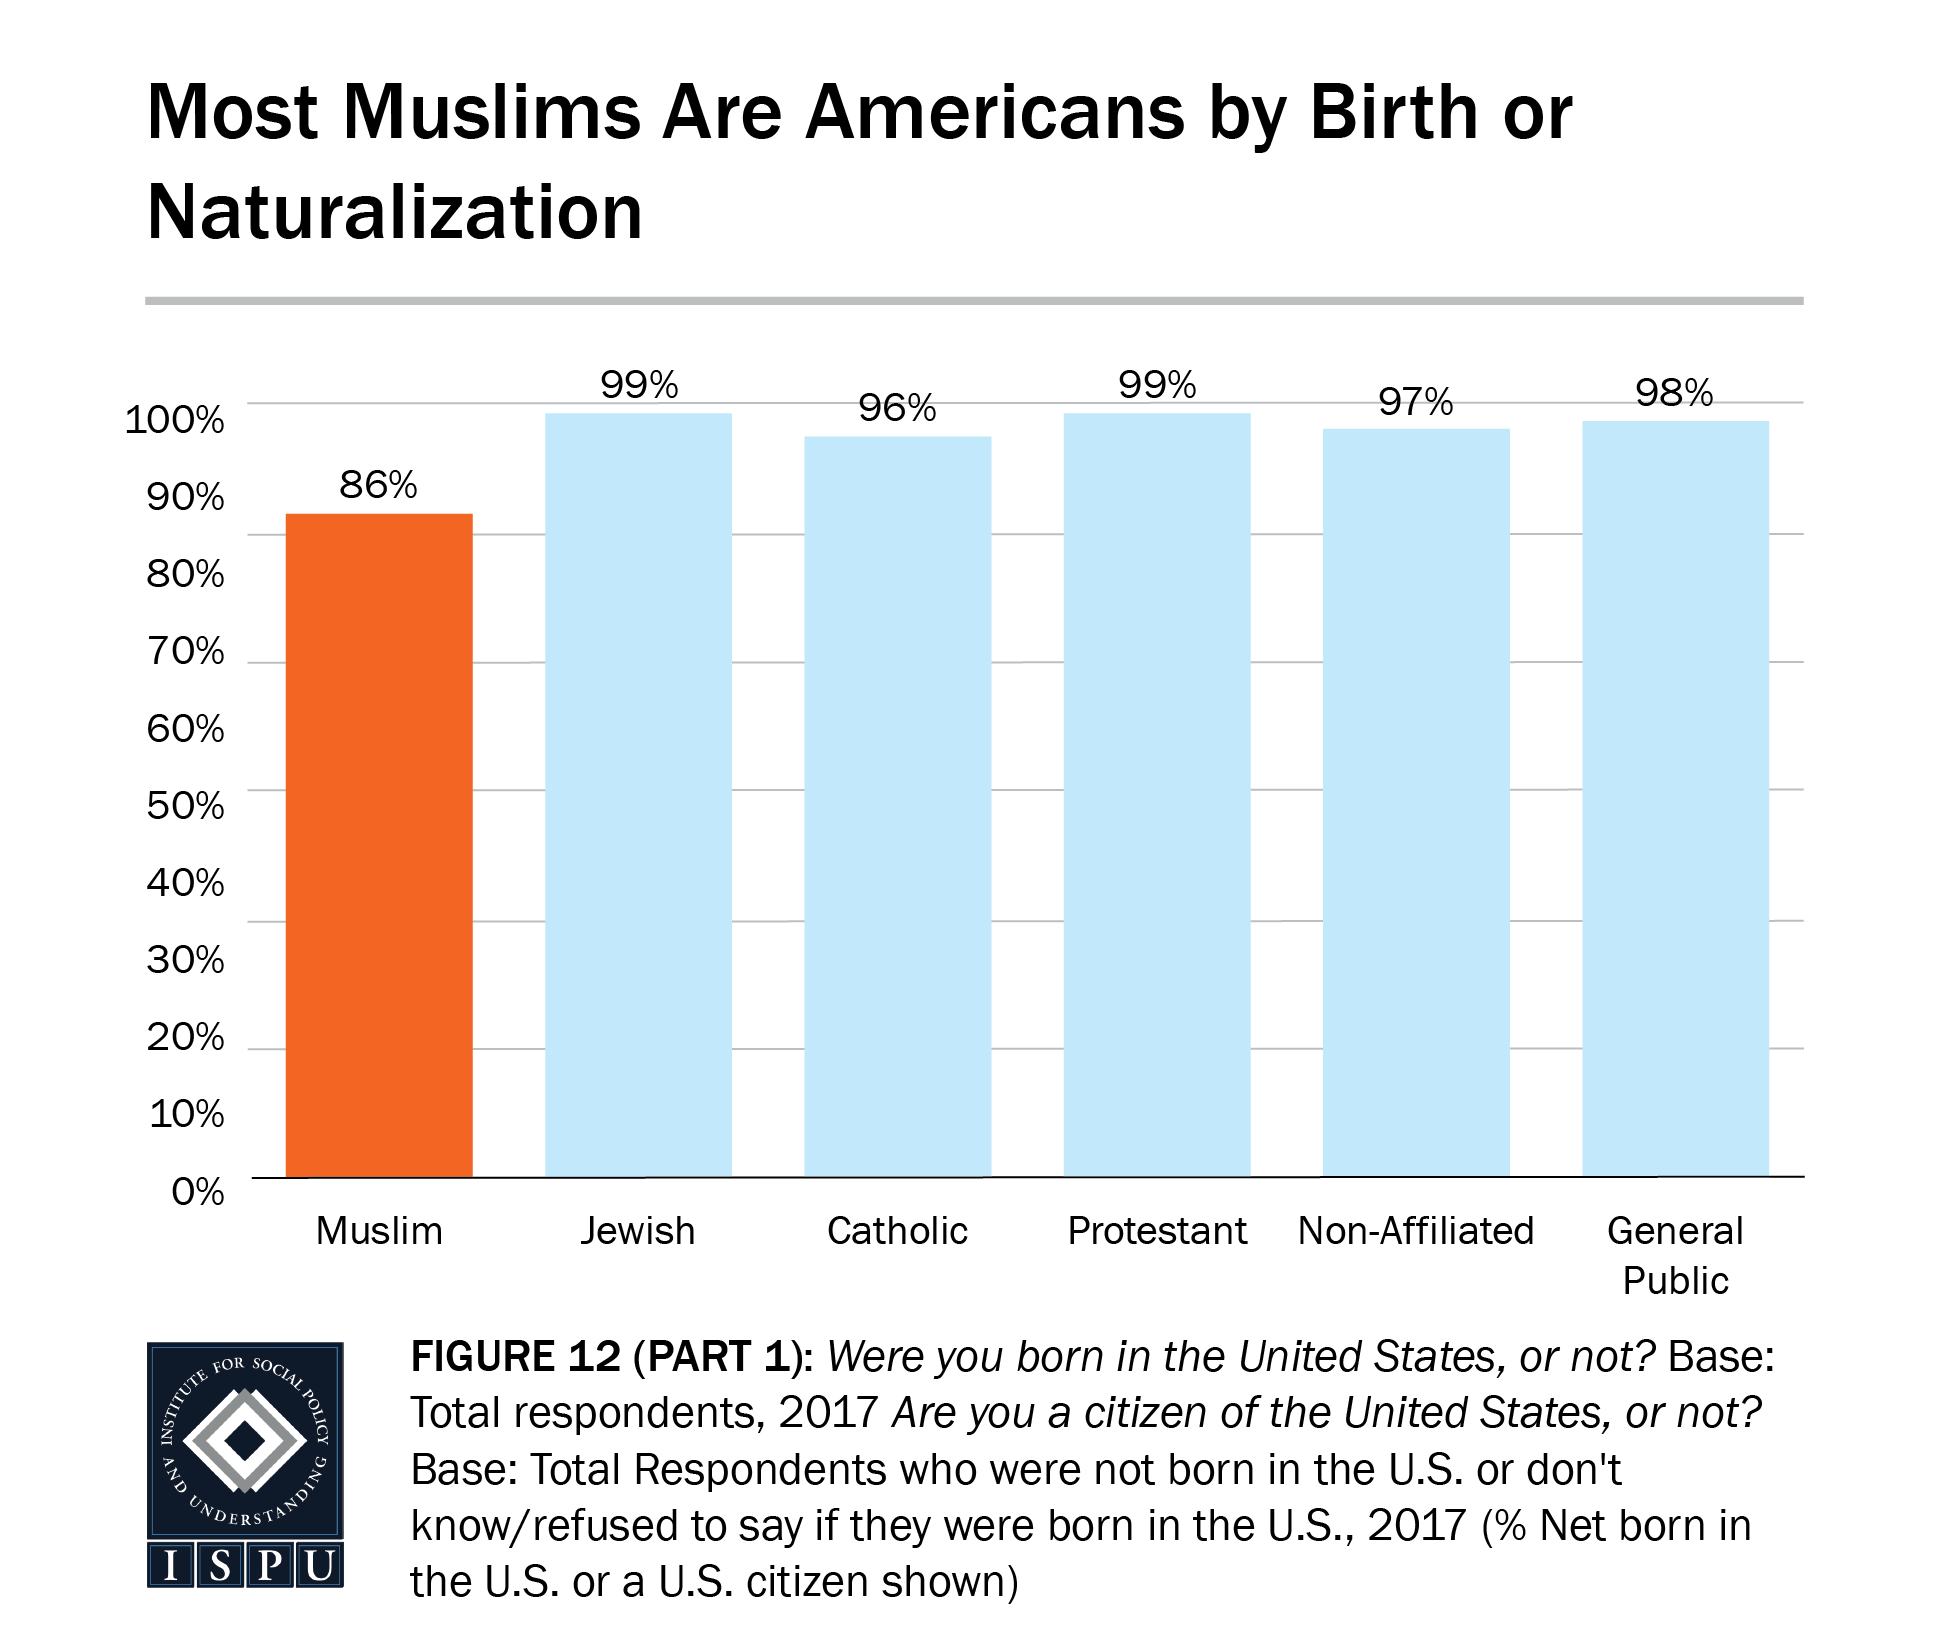 Figure 12, Part 1: Bar graph showing that most Muslims (86%) are Americans by birth or naturalization